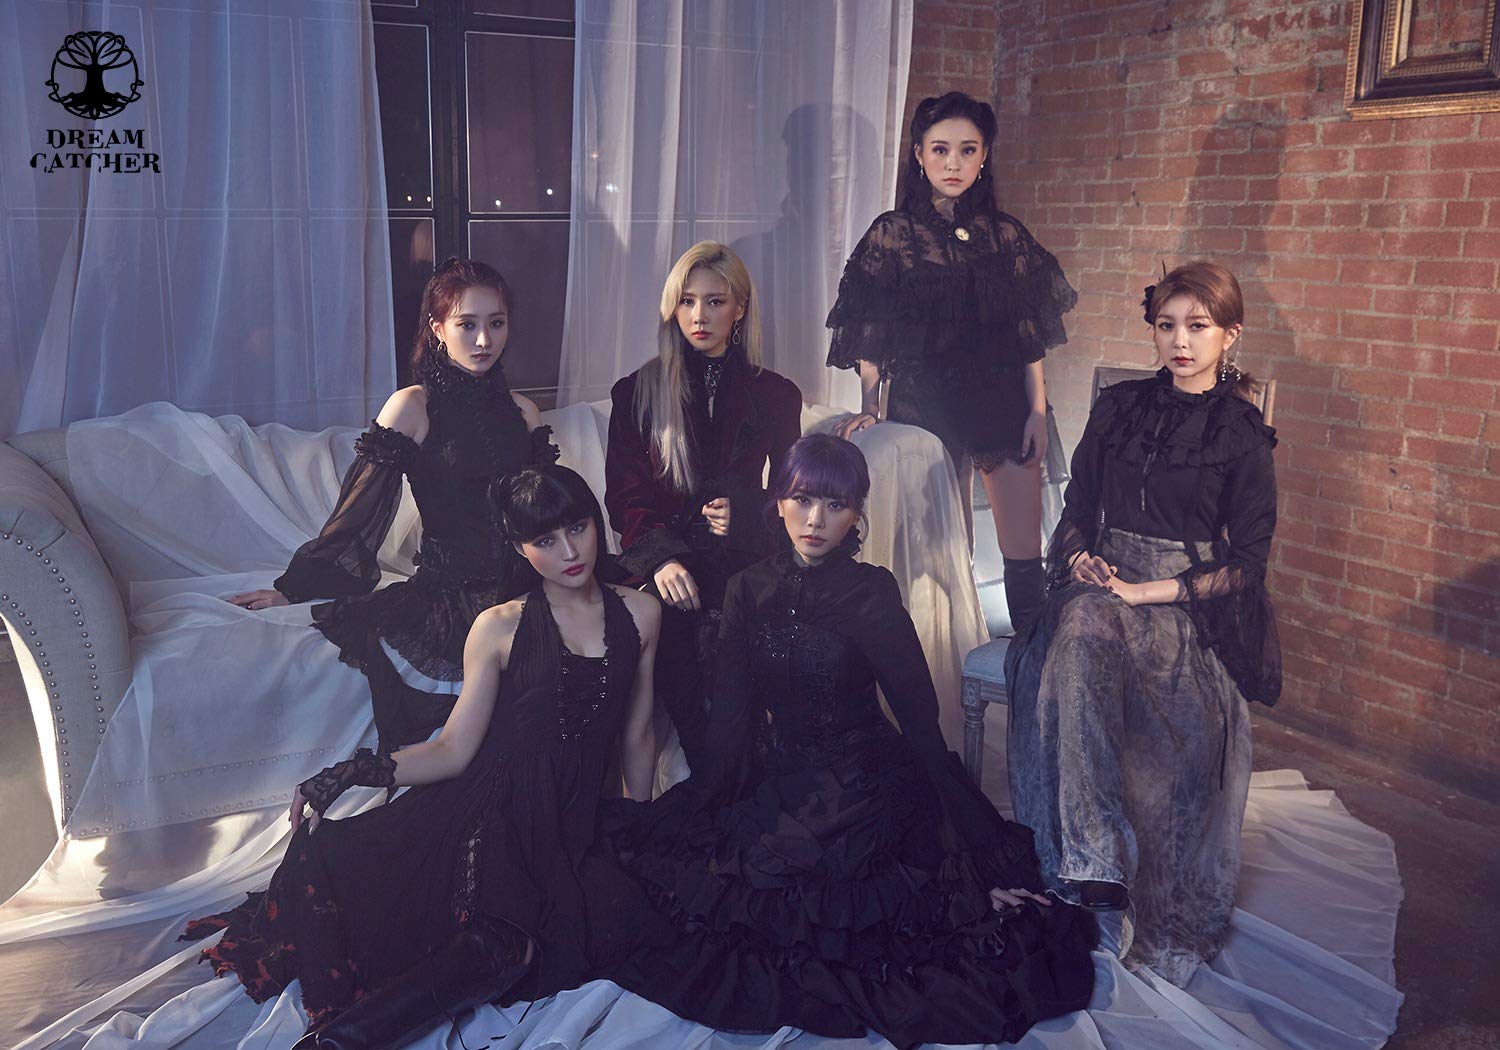 A new world presented by Dreamcatcher [Dystopia : The Tree of Language] Dreamcatcher's new world 'Dystopia' opens. Dreamca...